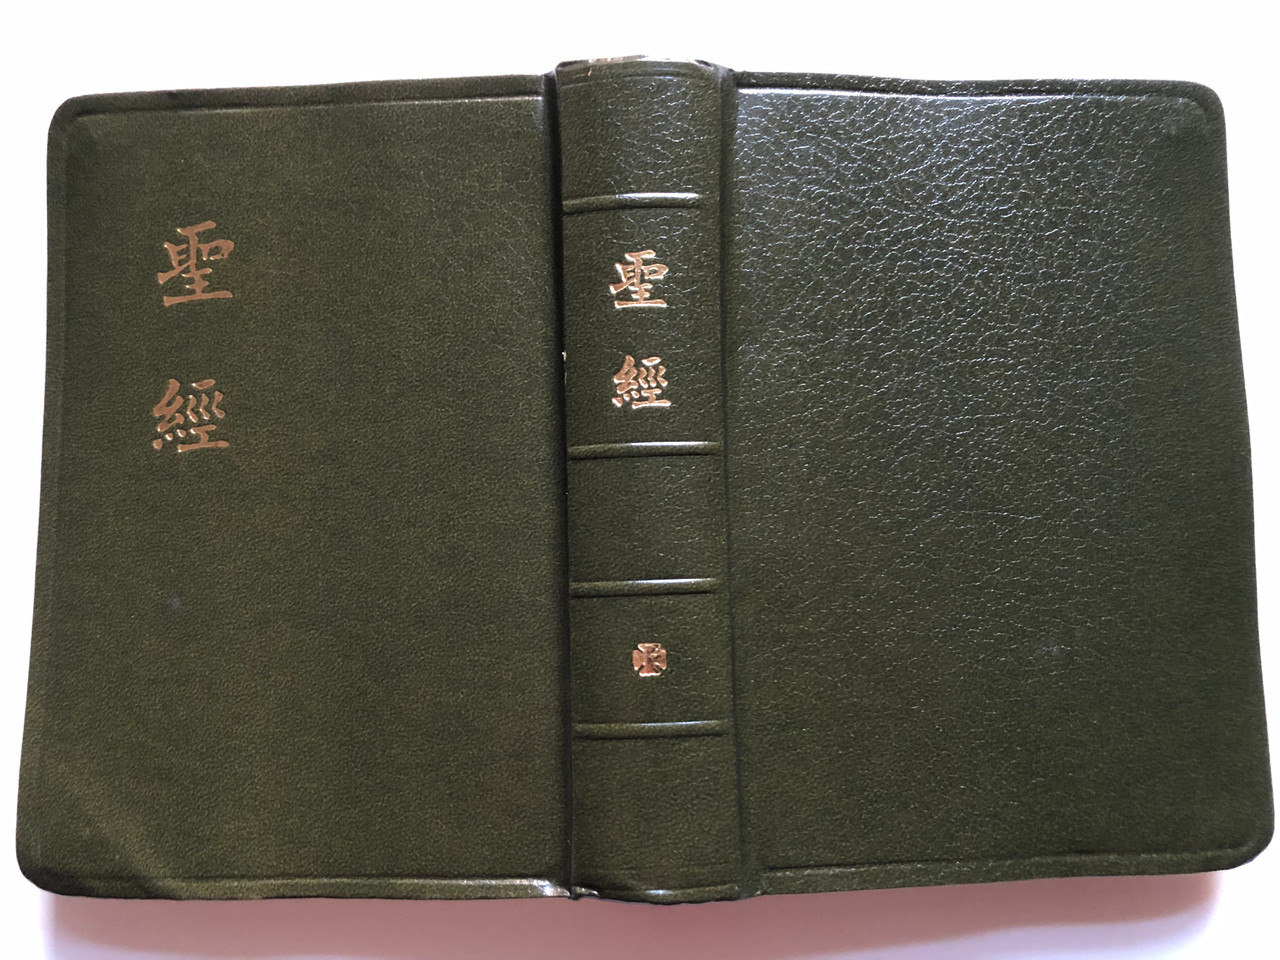 https://cdn10.bigcommerce.com/s-62bdpkt7pb/products/50545/images/257844/Chinese_Holy_Bible_Green_17__06356.1667638010.1280.1280.JPG?c=2